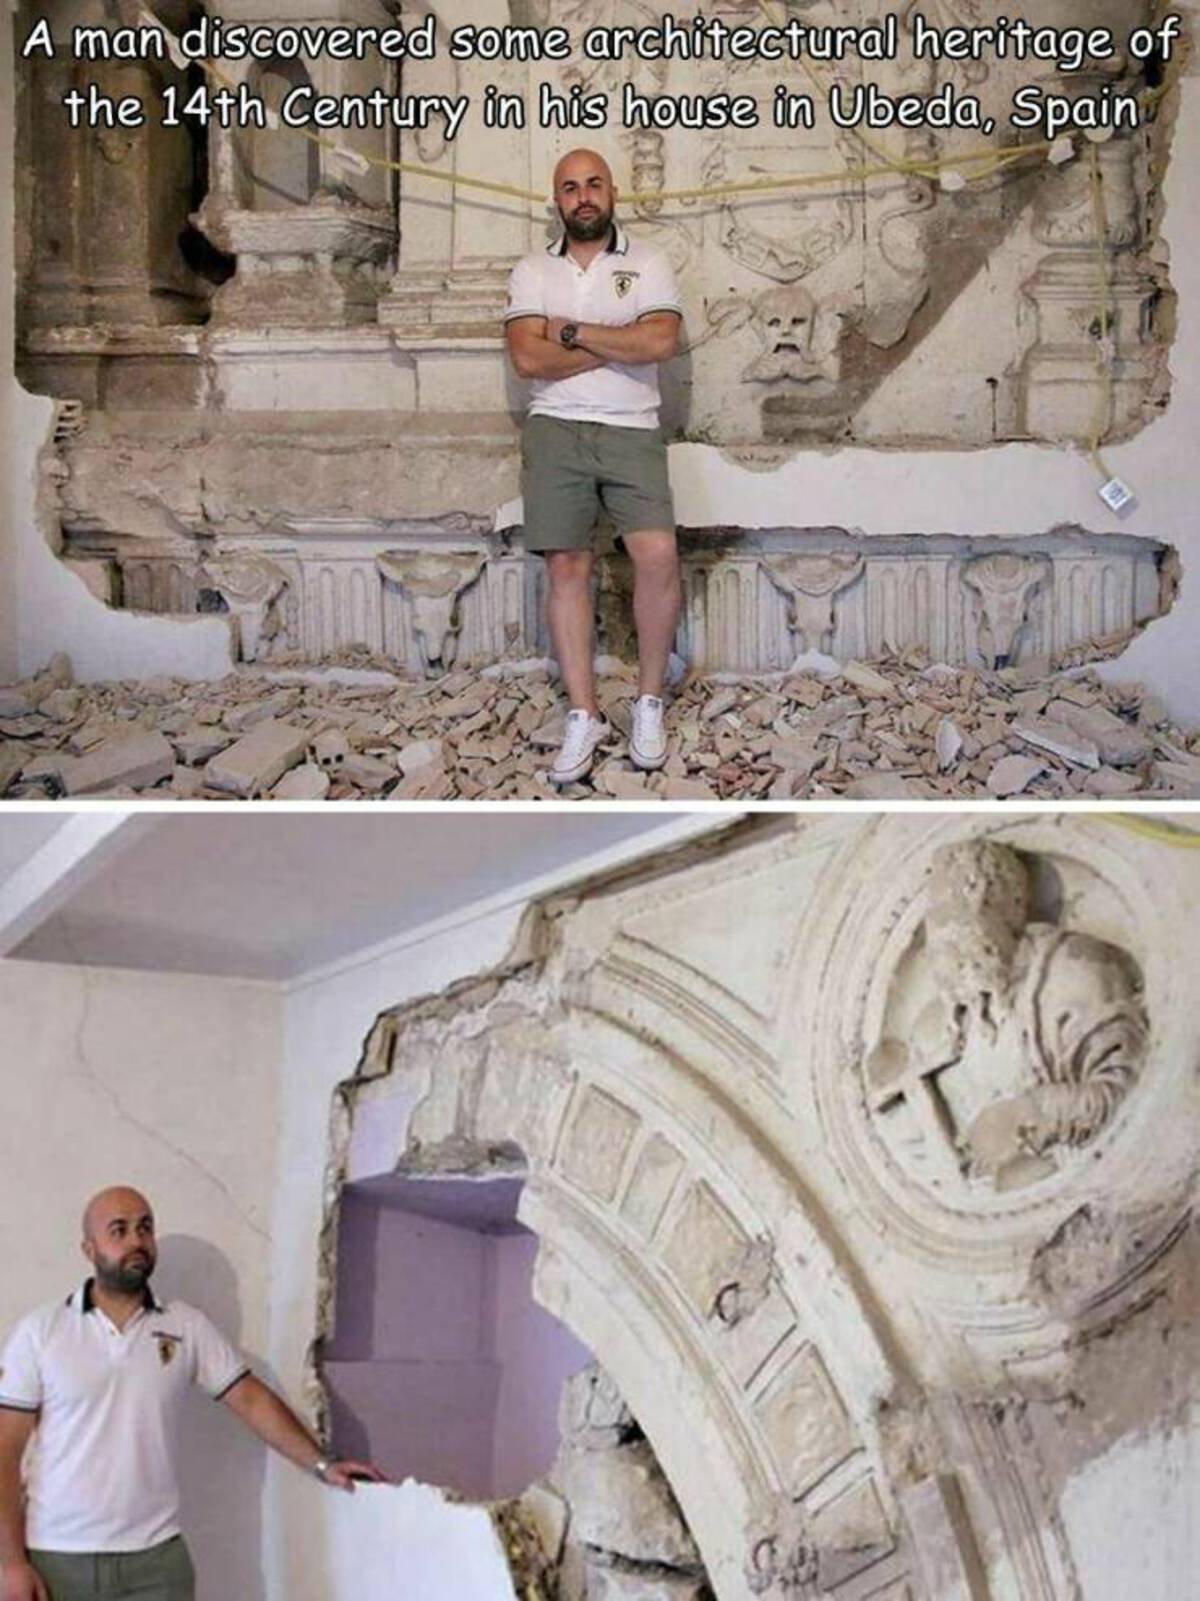 man discovered an architectural beauty from 14th century ad in his house in ubeda spain in 2016 when he decided to make renovations - A man discovered some architectural heritage of the 14th Century in his house in Ubeda, Spain